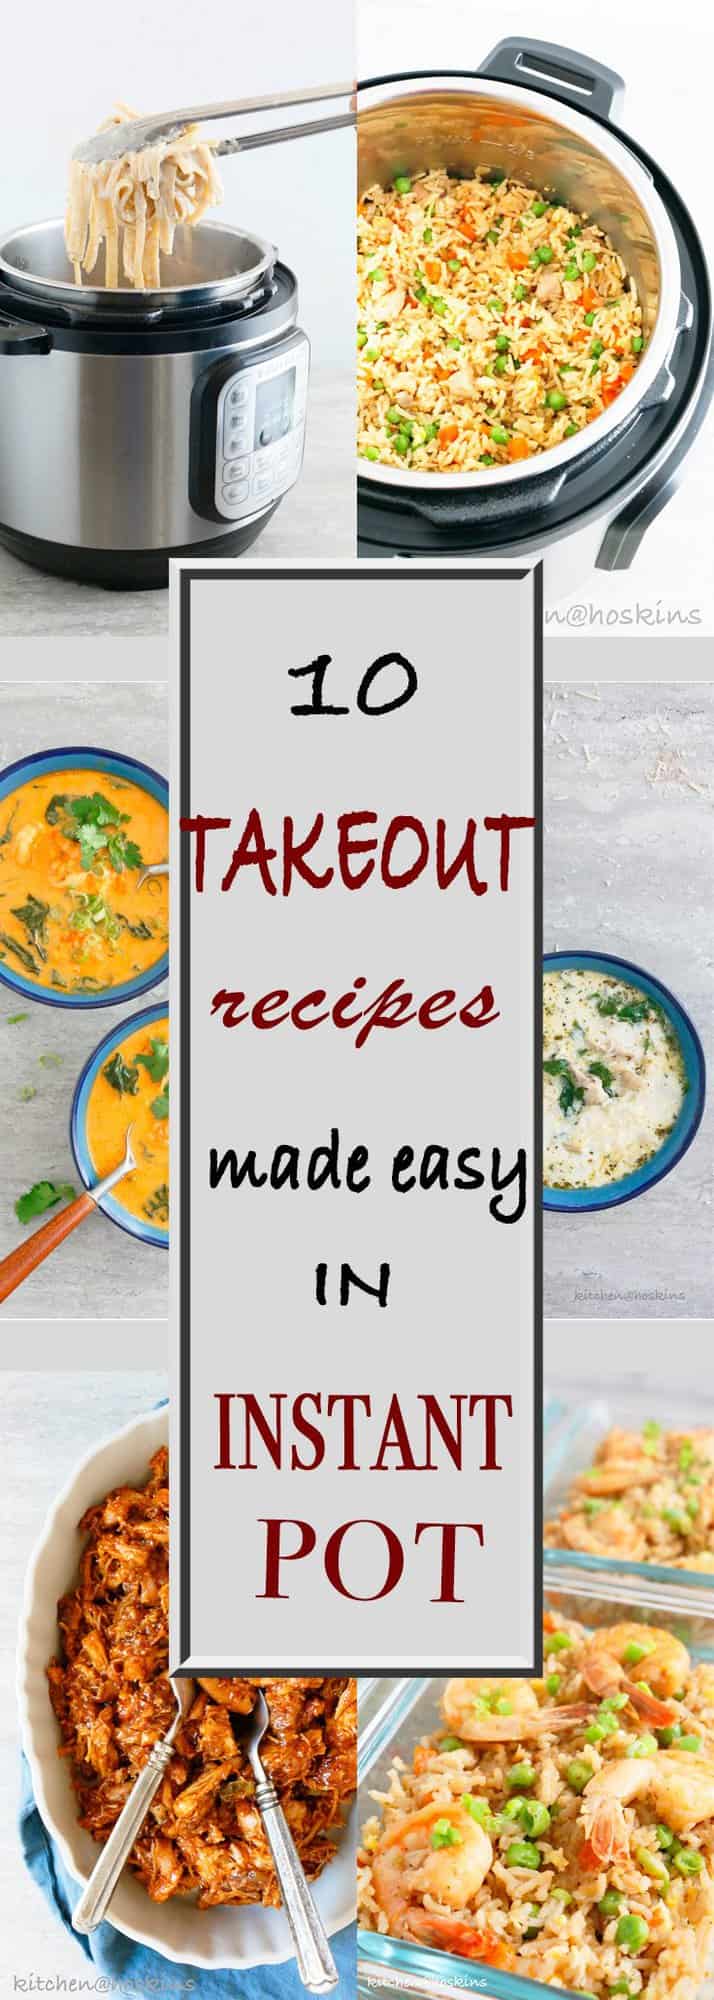 instant pot takeout recipes